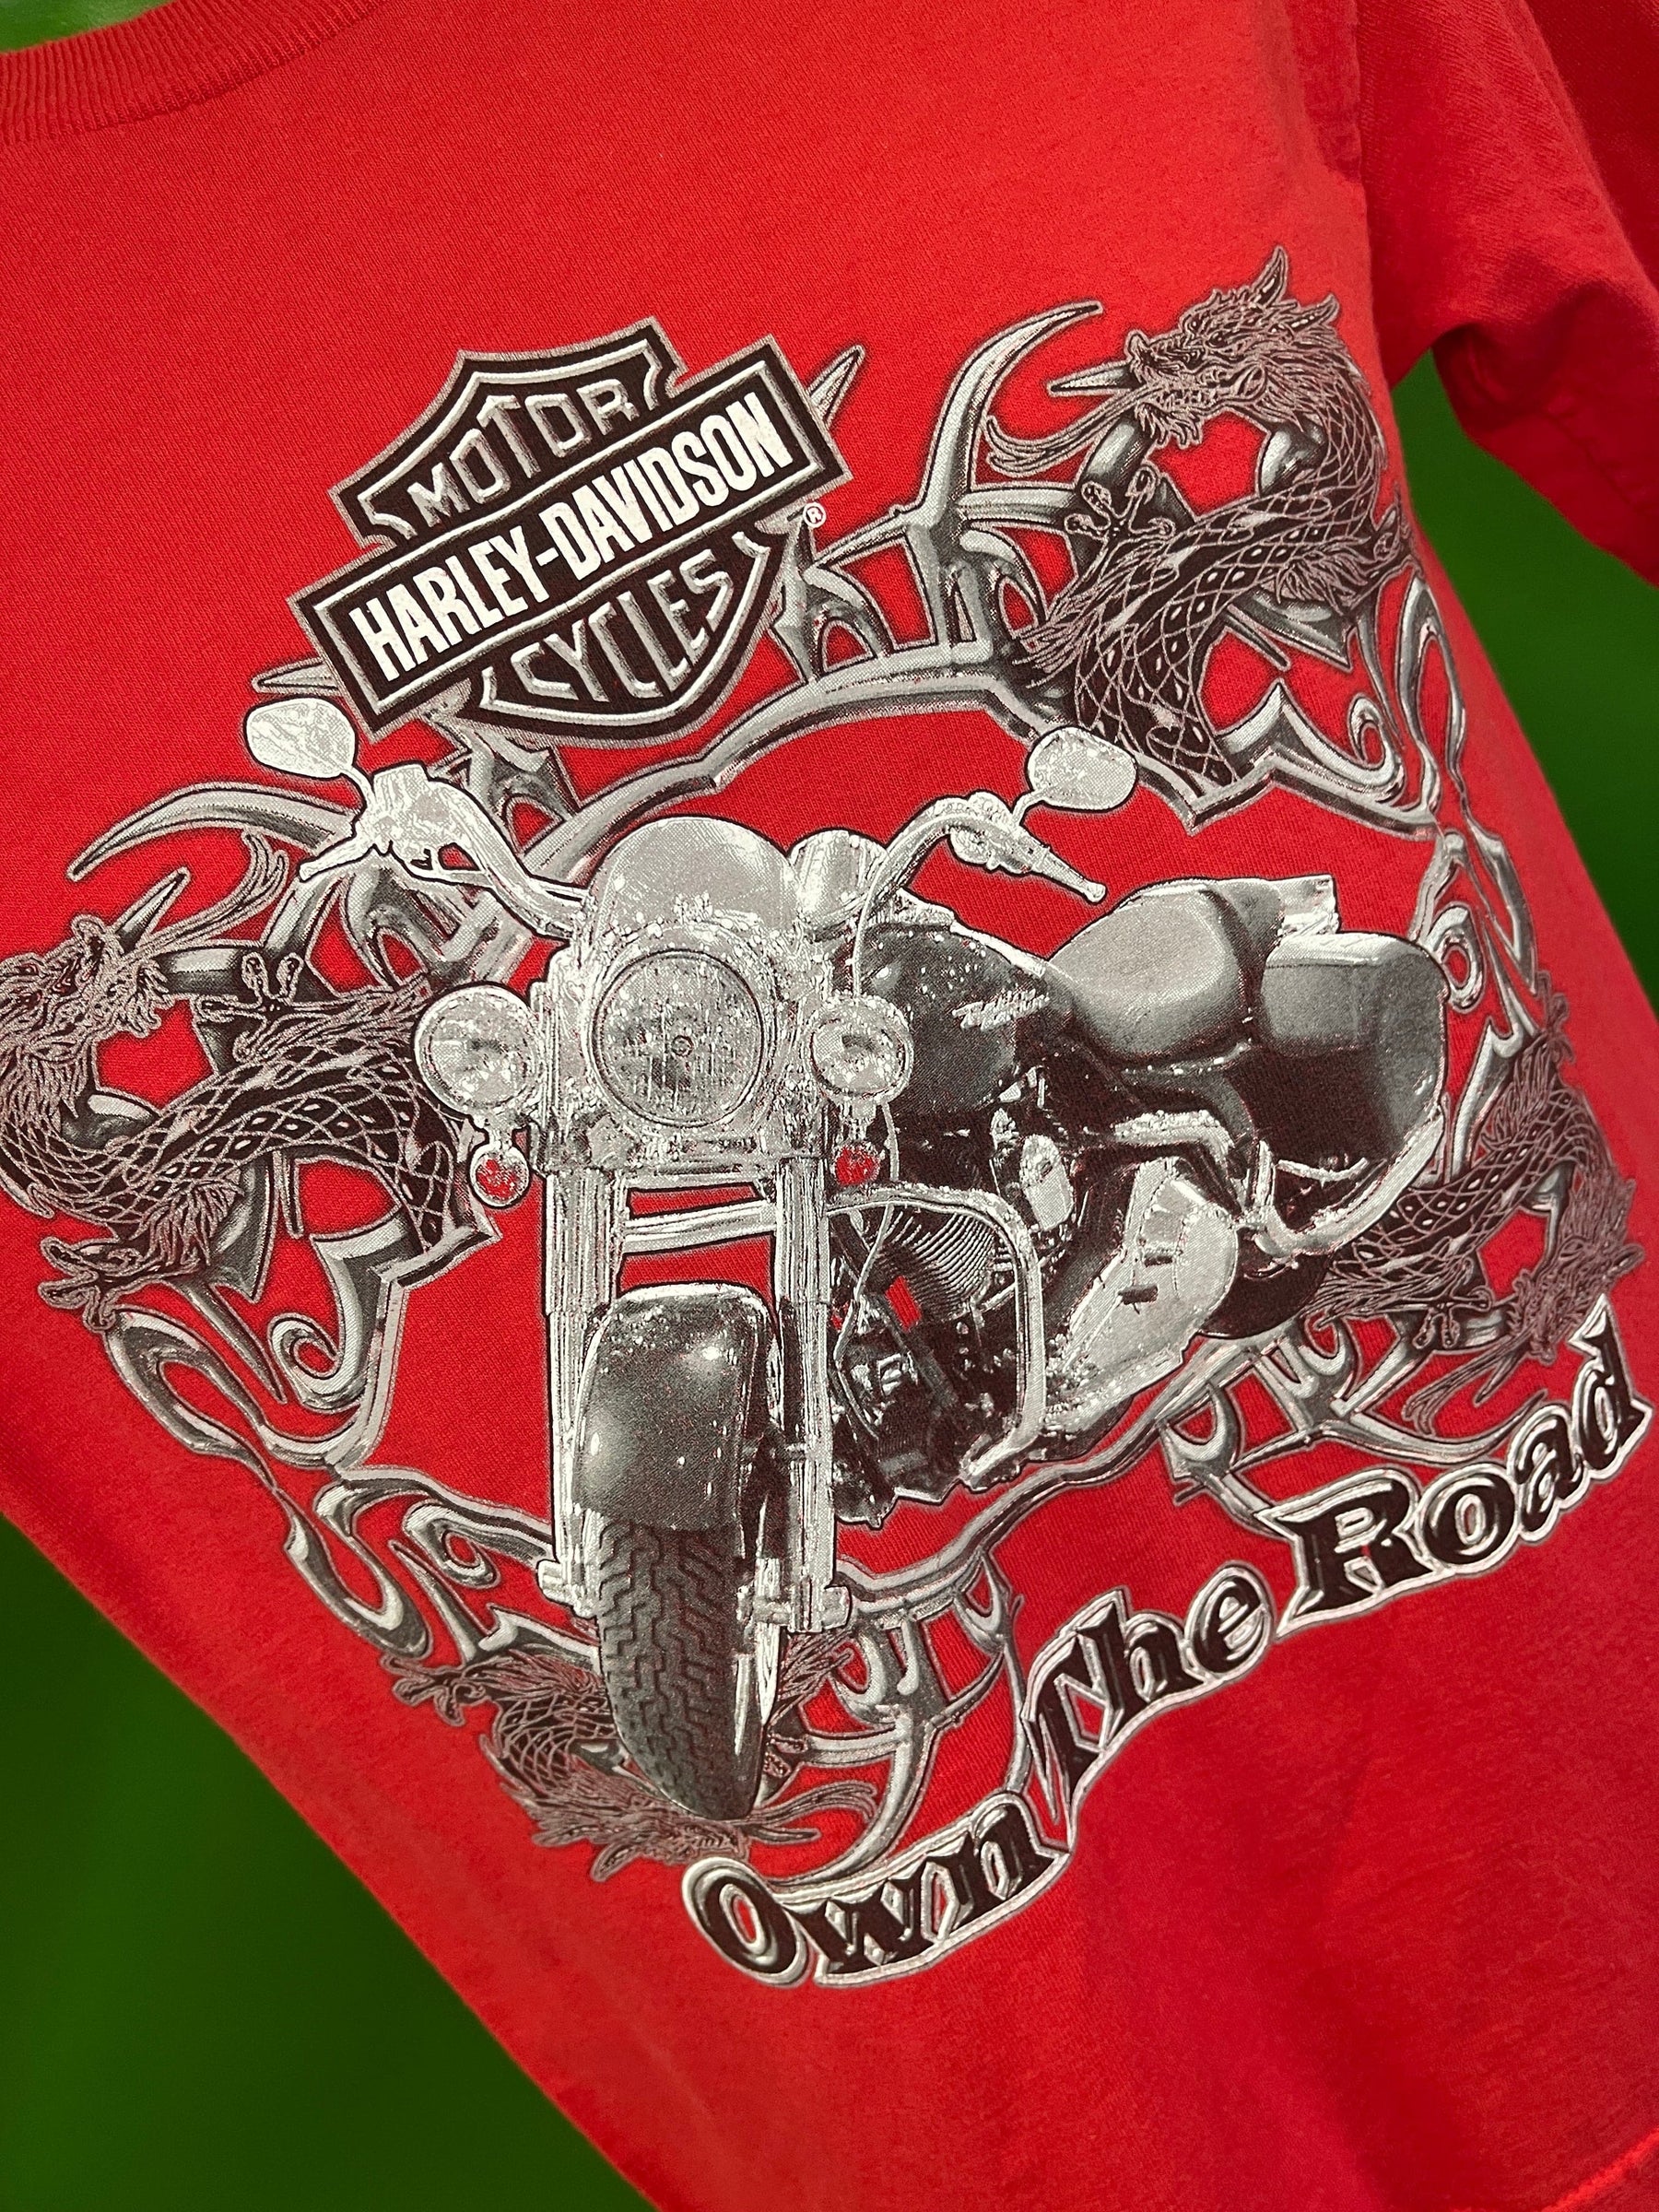 Harley-Davidson Motorcycles "Own the Road" Red L/S T-Shirt Youth Medium 10-12